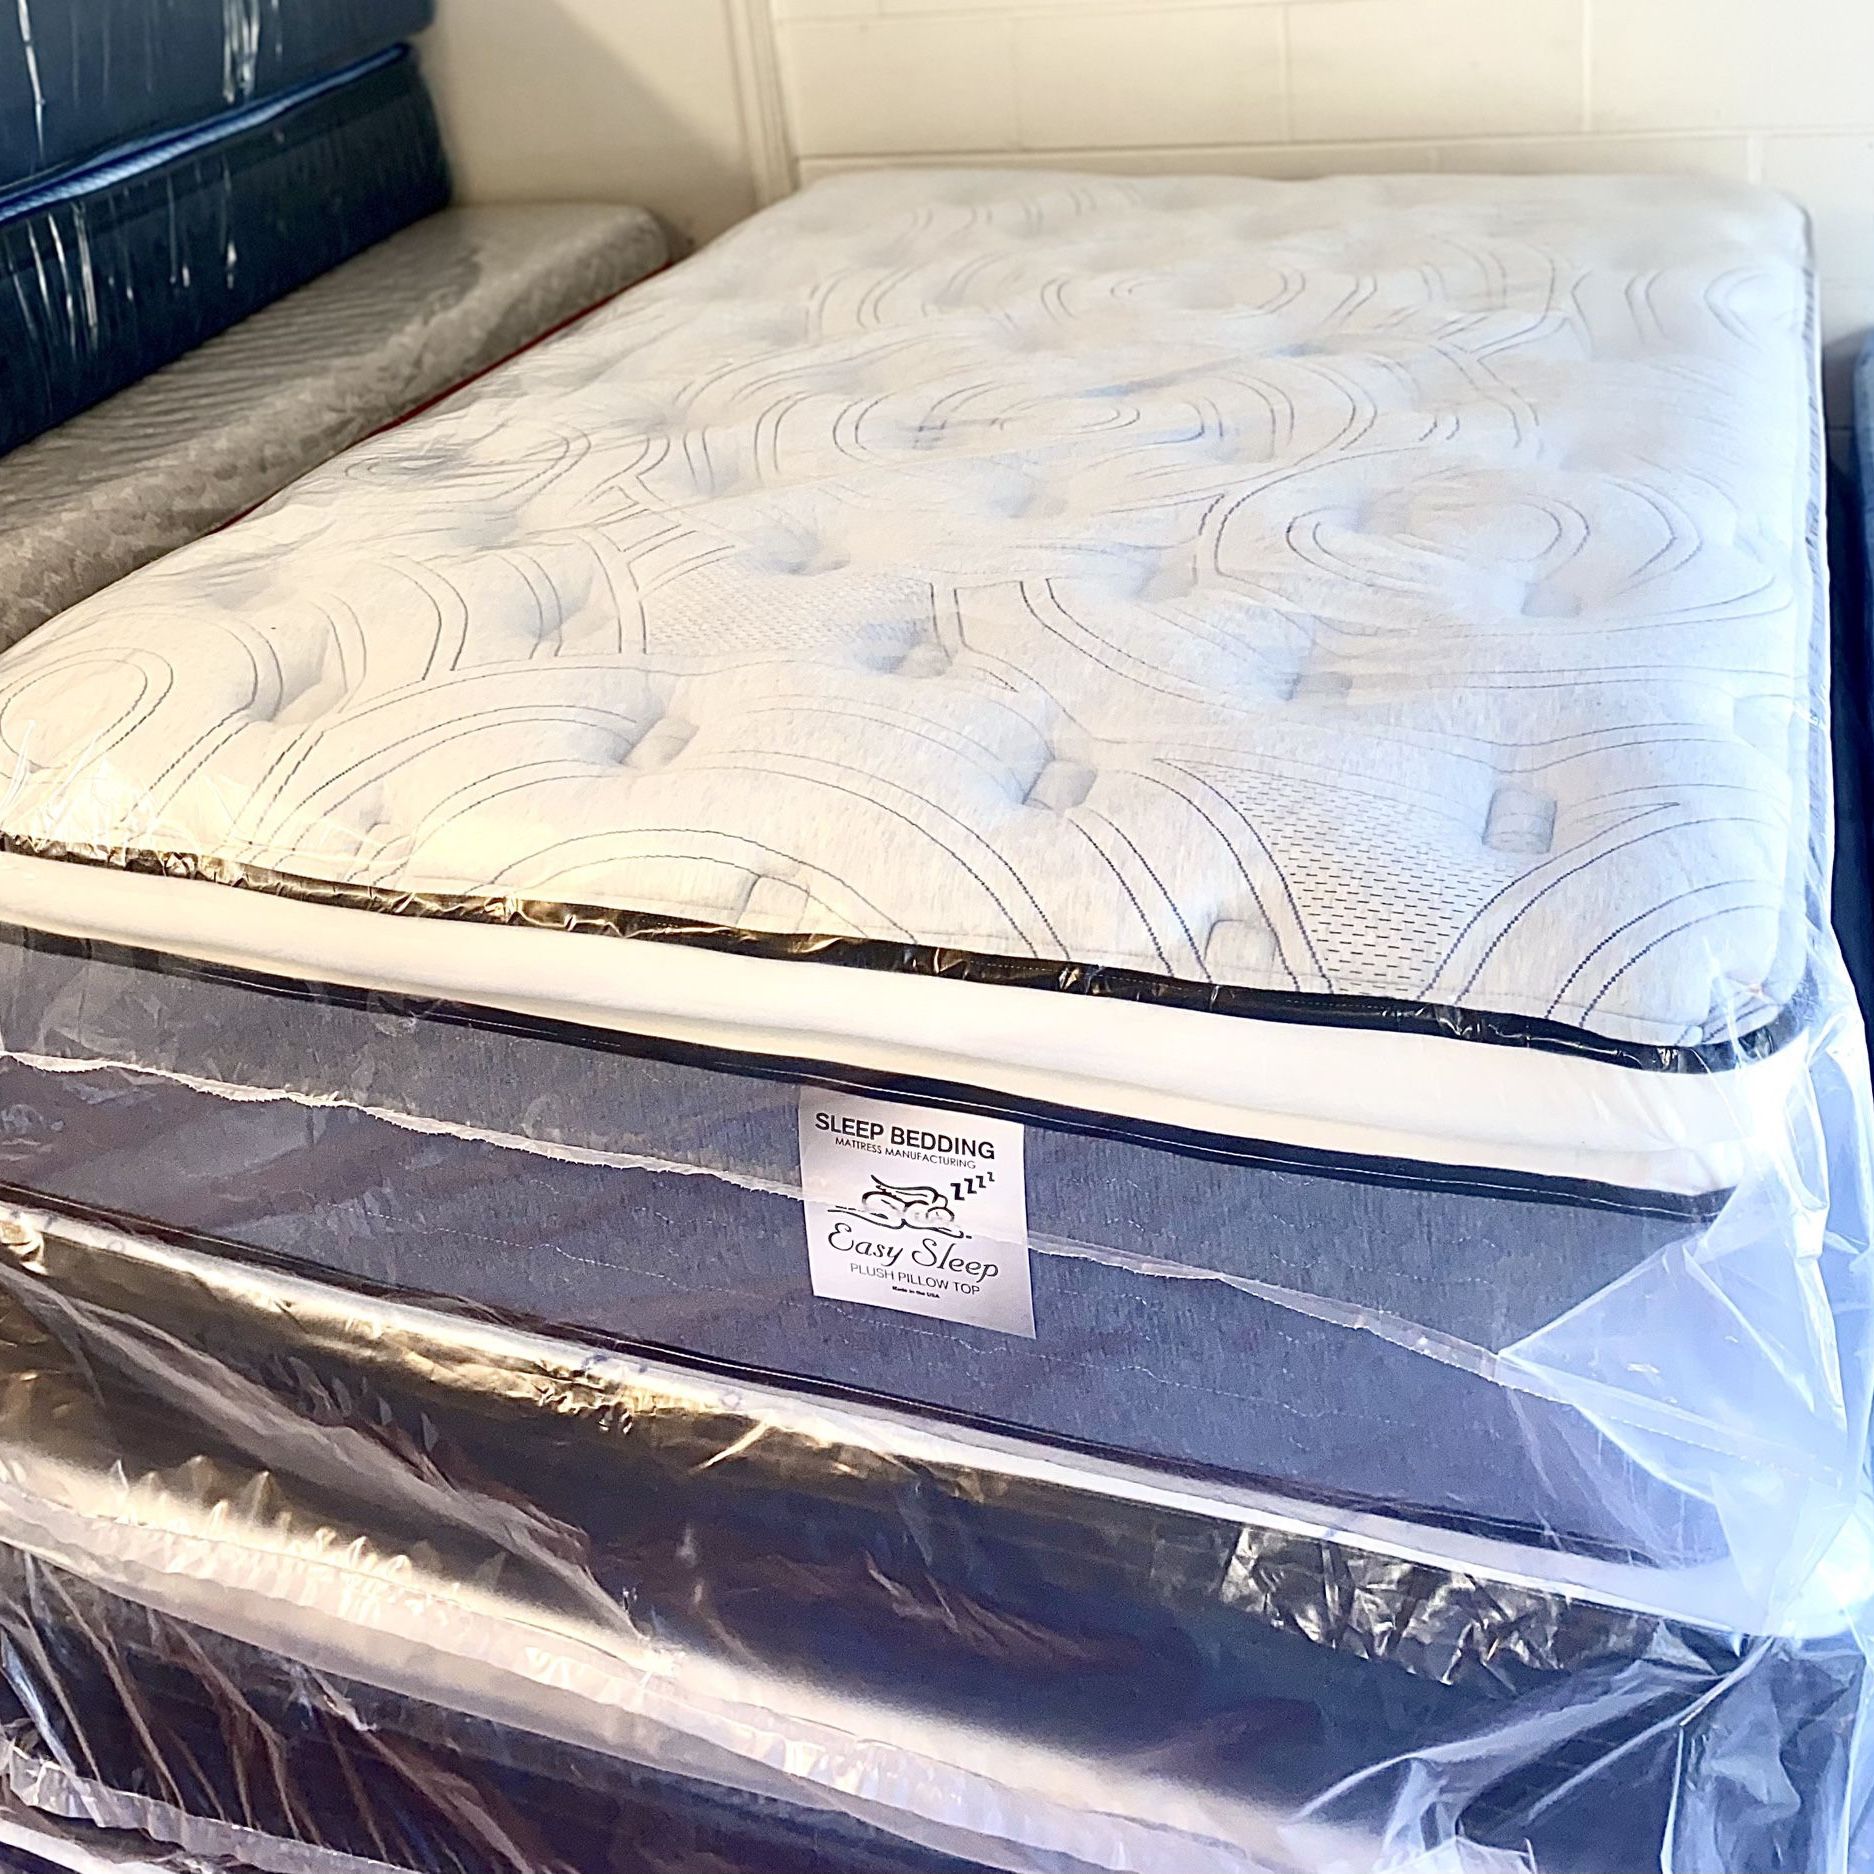 Full Size Mattress 14” Inches Pillow Top Of High Quality Also Available in Twin-Queen-King and Cali-King Same Day Delivery